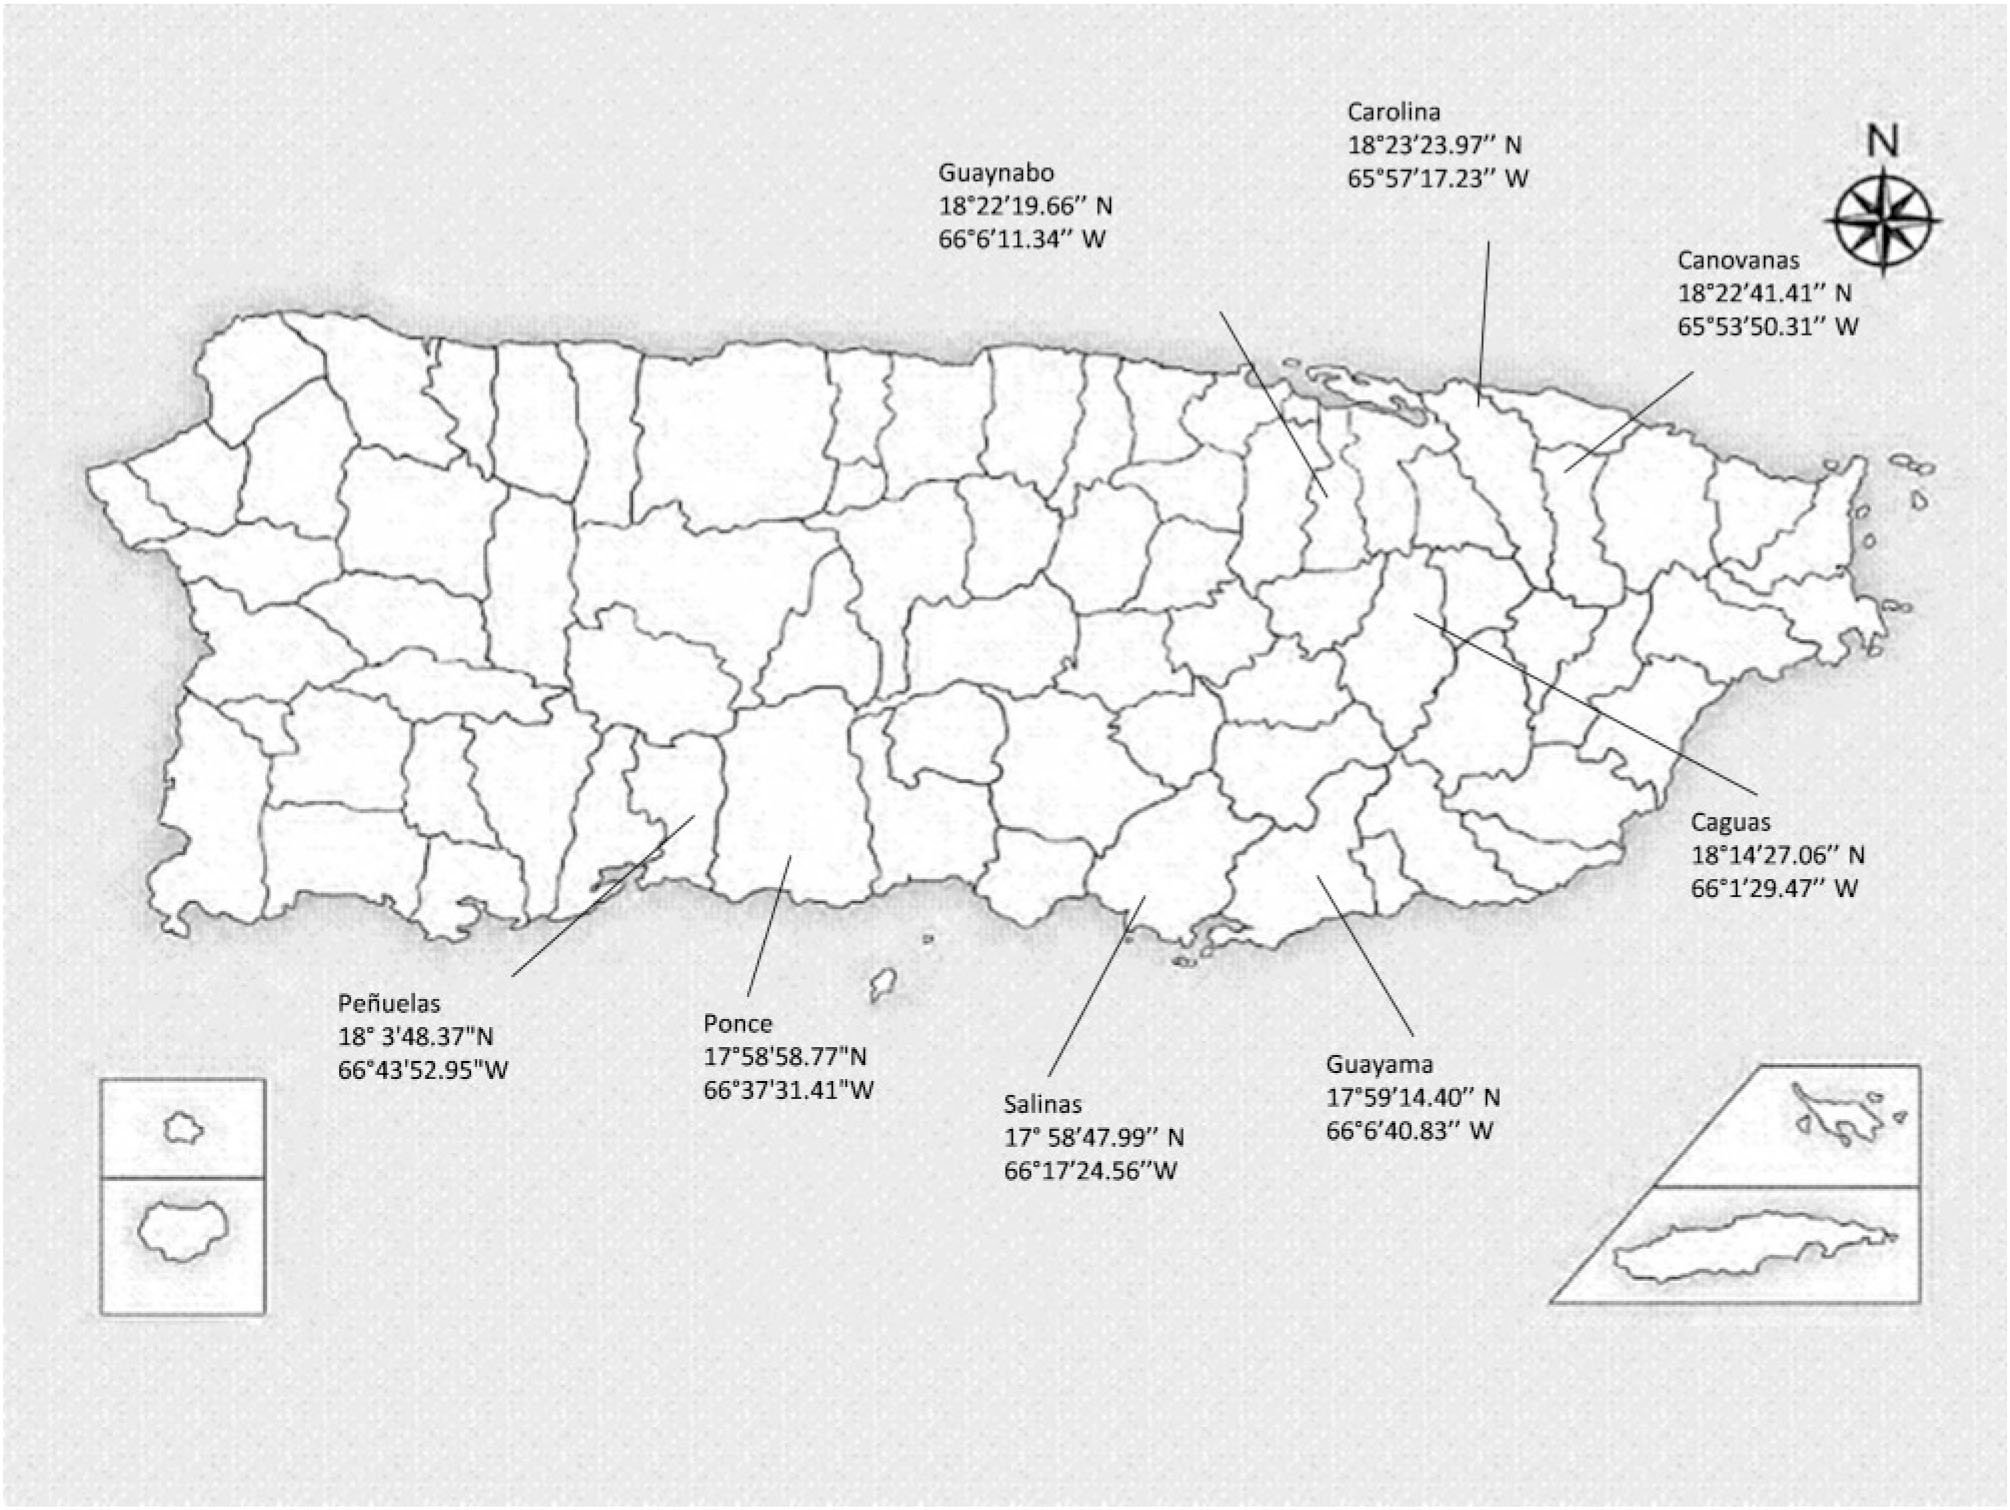 Susceptibility To Temephos And Spinosad In Aedes Aegypti Diptera Culicidae From Puerto Rico